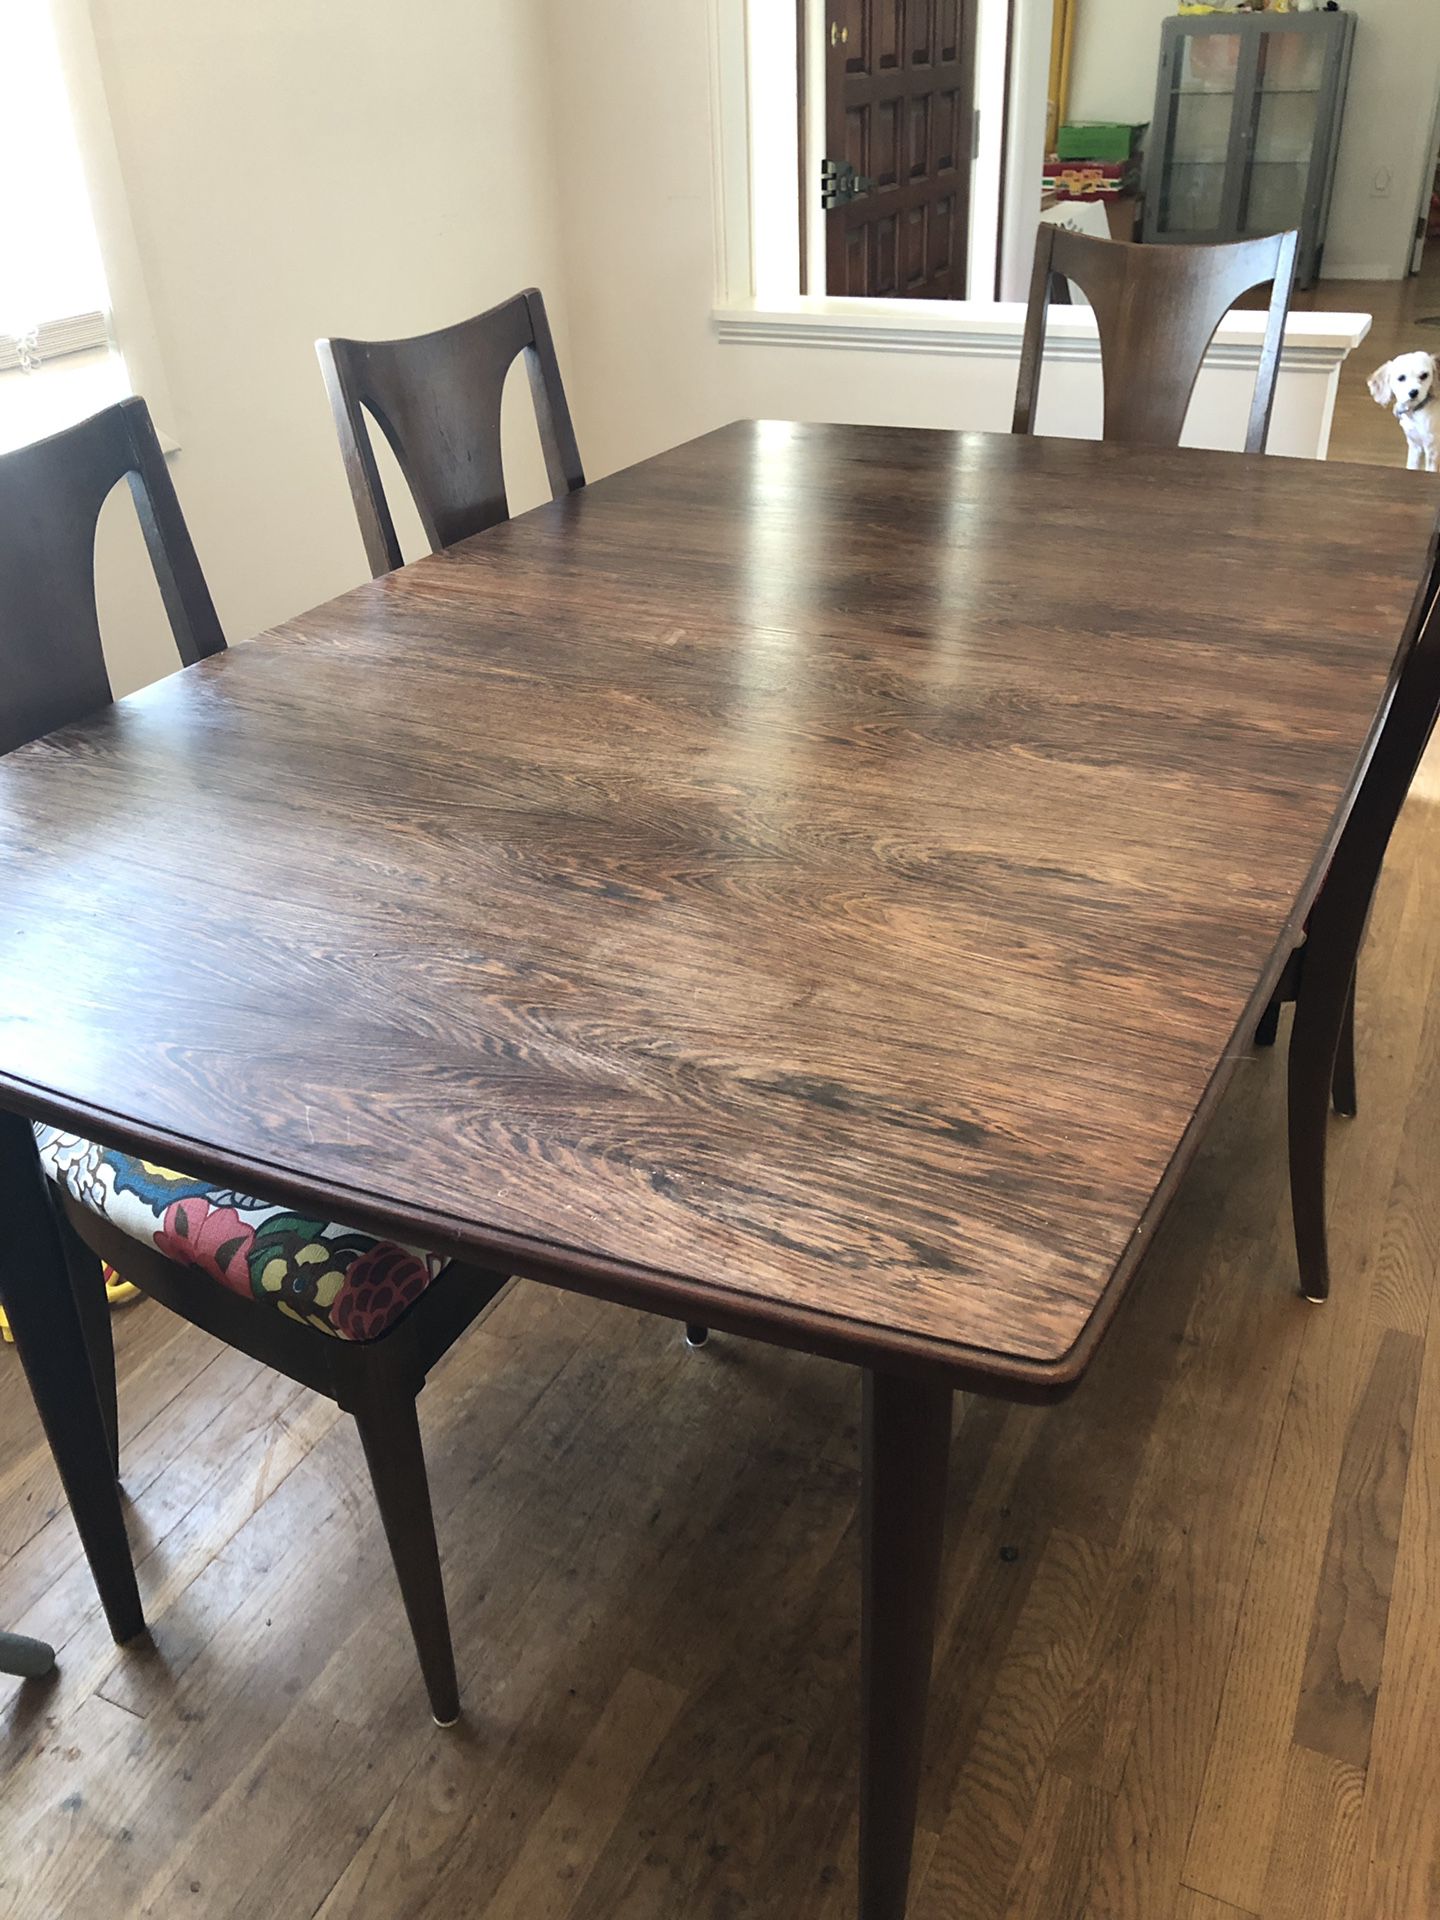 Rosewood vintage table and chairs